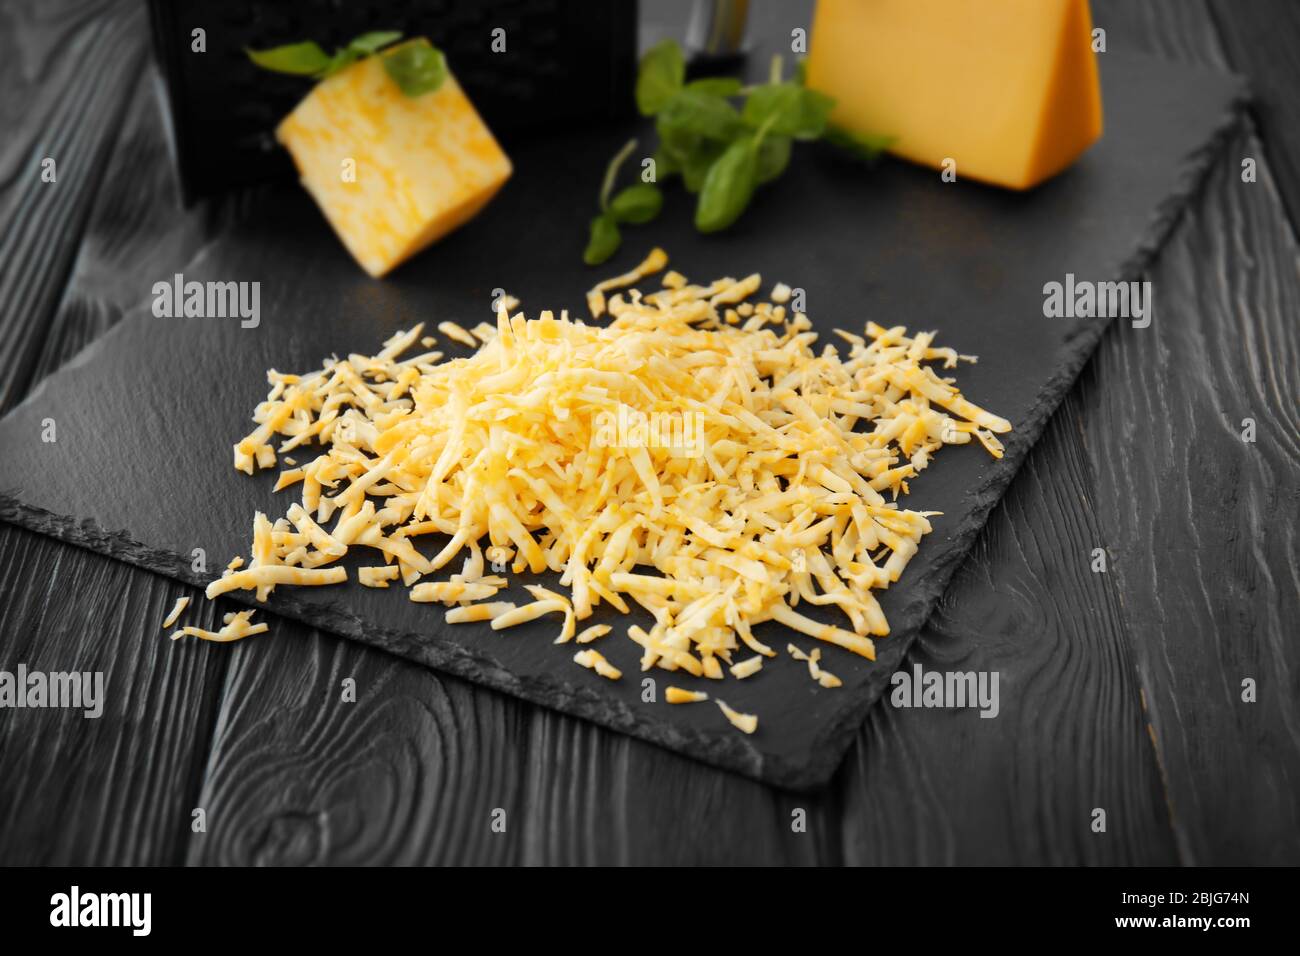 https://c8.alamy.com/comp/2BJG74N/slate-plate-with-grated-cheese-on-wooden-table-2BJG74N.jpg